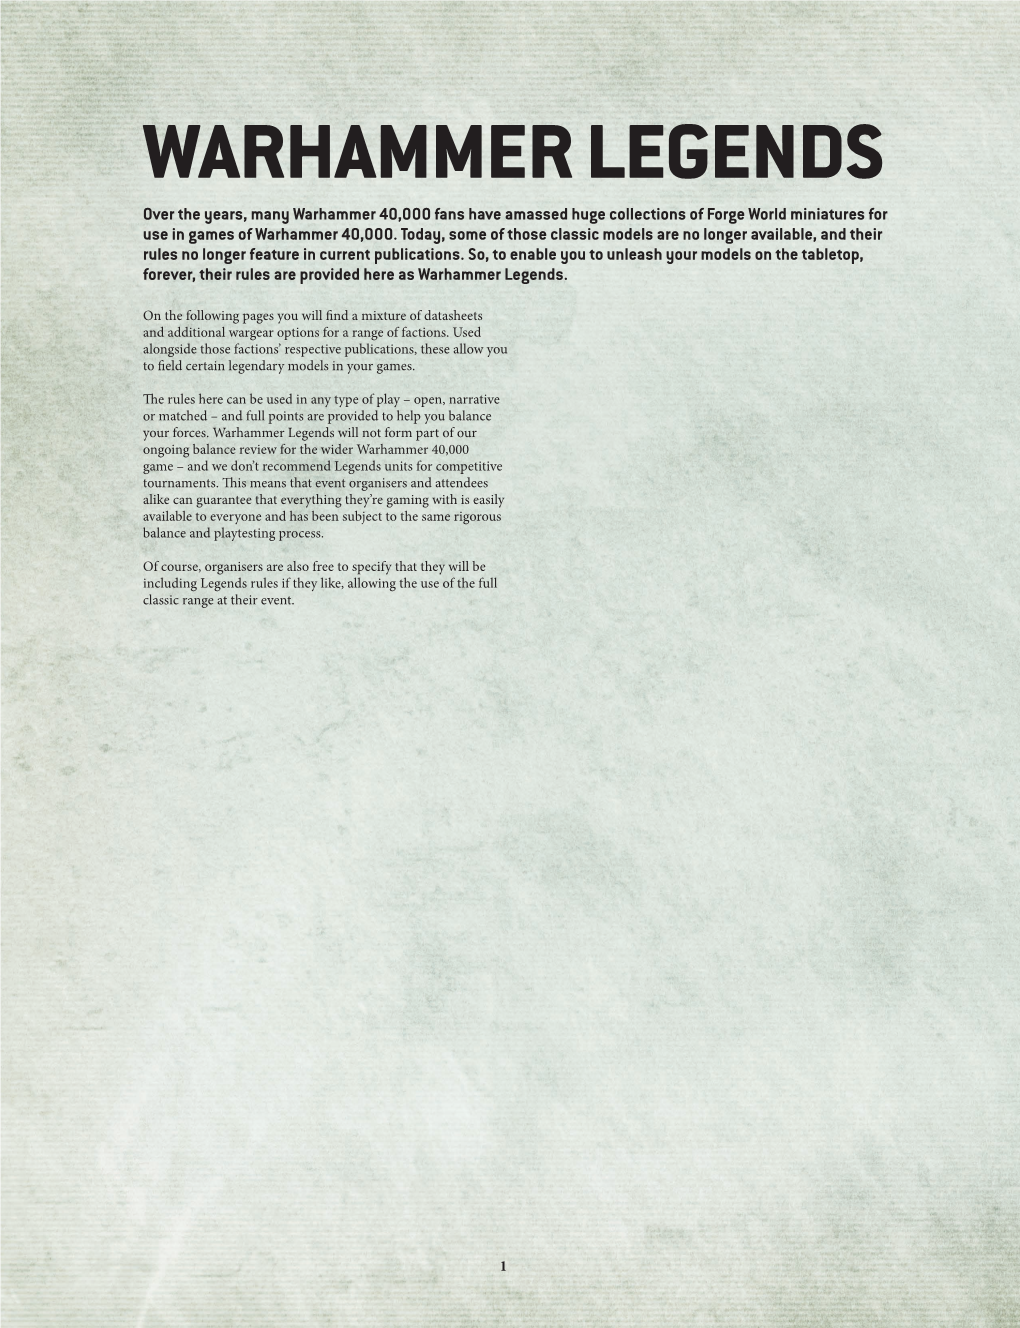 LEGENDS Over the Years, Many Warhammer 40,000 Fans Have Amassed Huge Collections of Forge World Miniatures for Use in Games of Warhammer 40,000